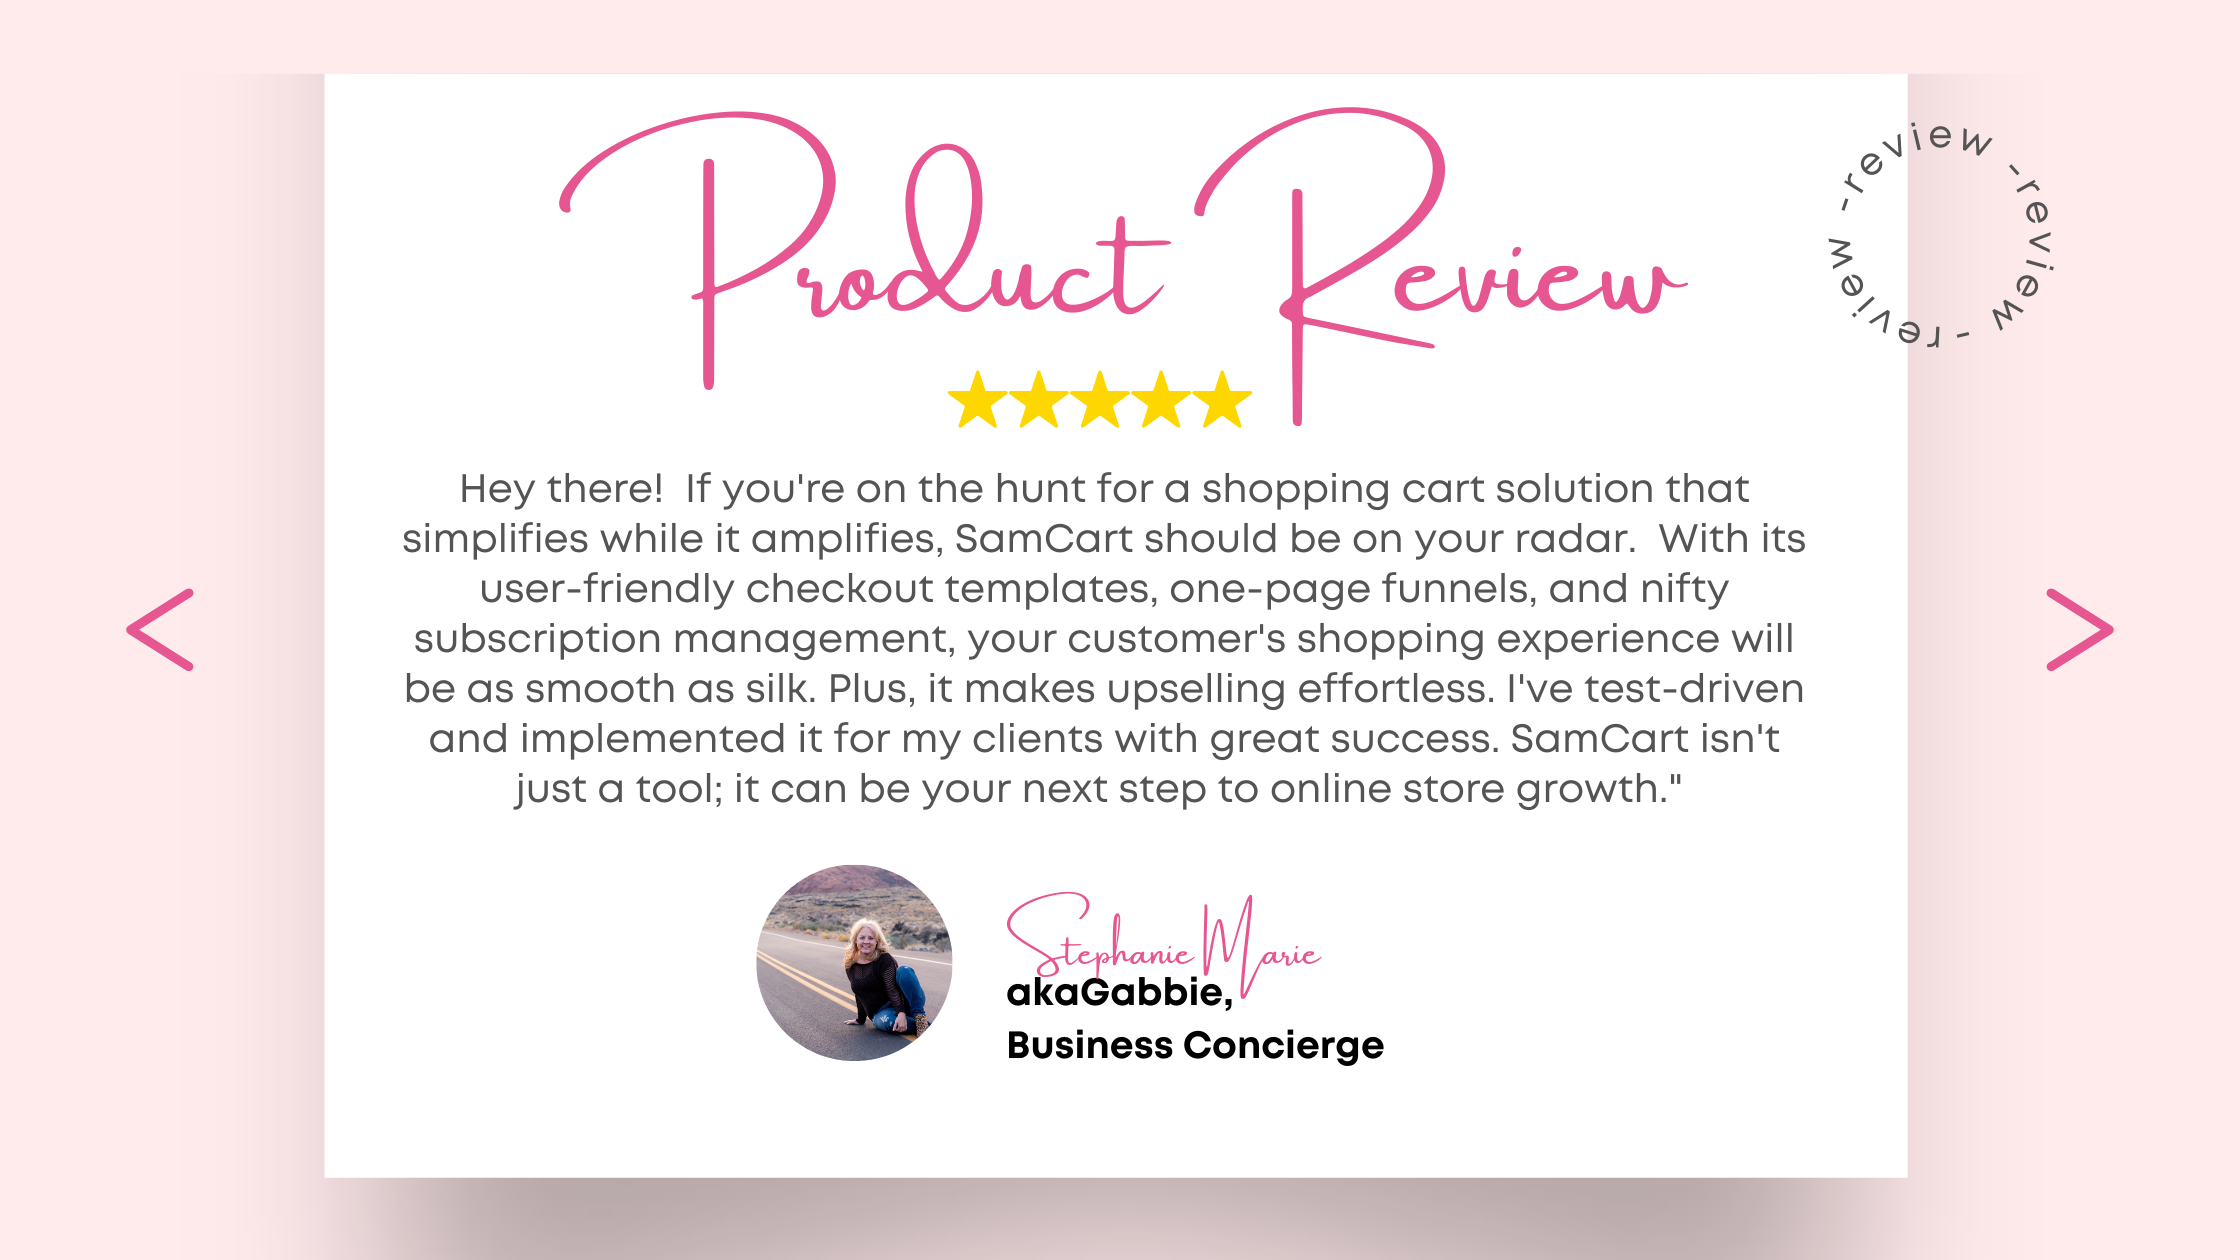 Product Review for SamCart by Stephanie Marie, akaGabbie, Business Concierge